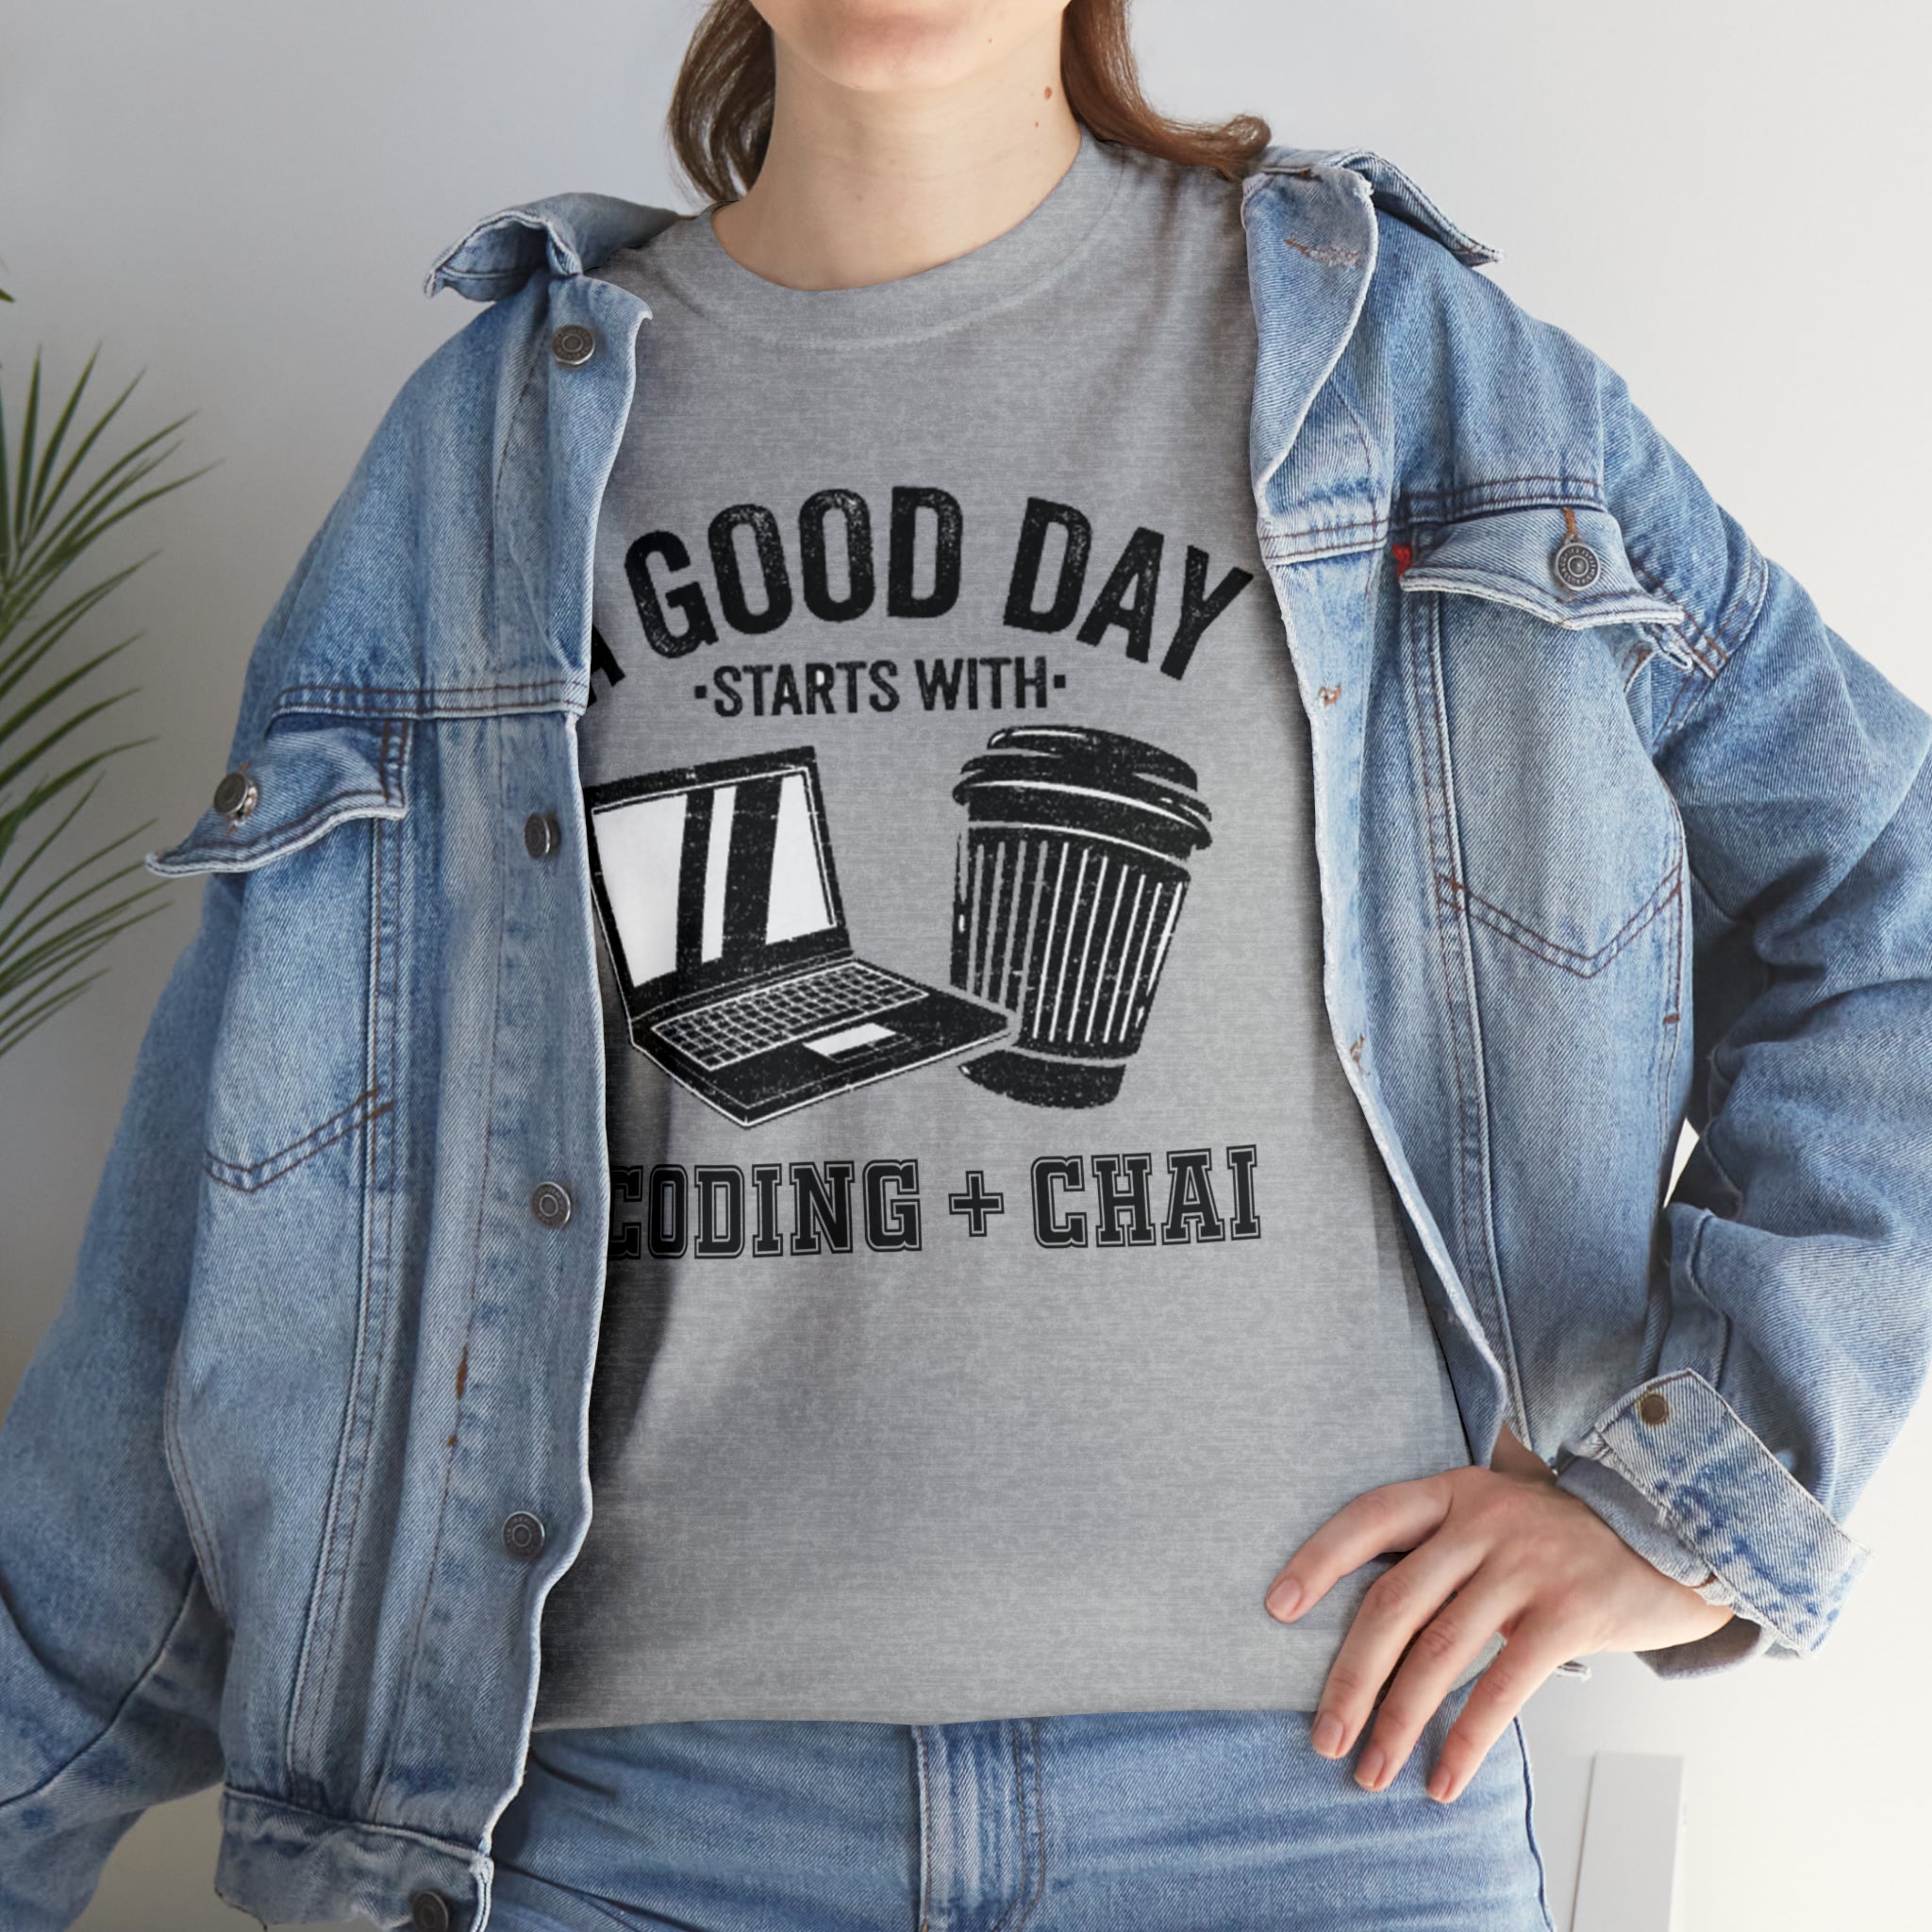 A Good Day Starts with Coding + Chai T-Shirt Design by C&C